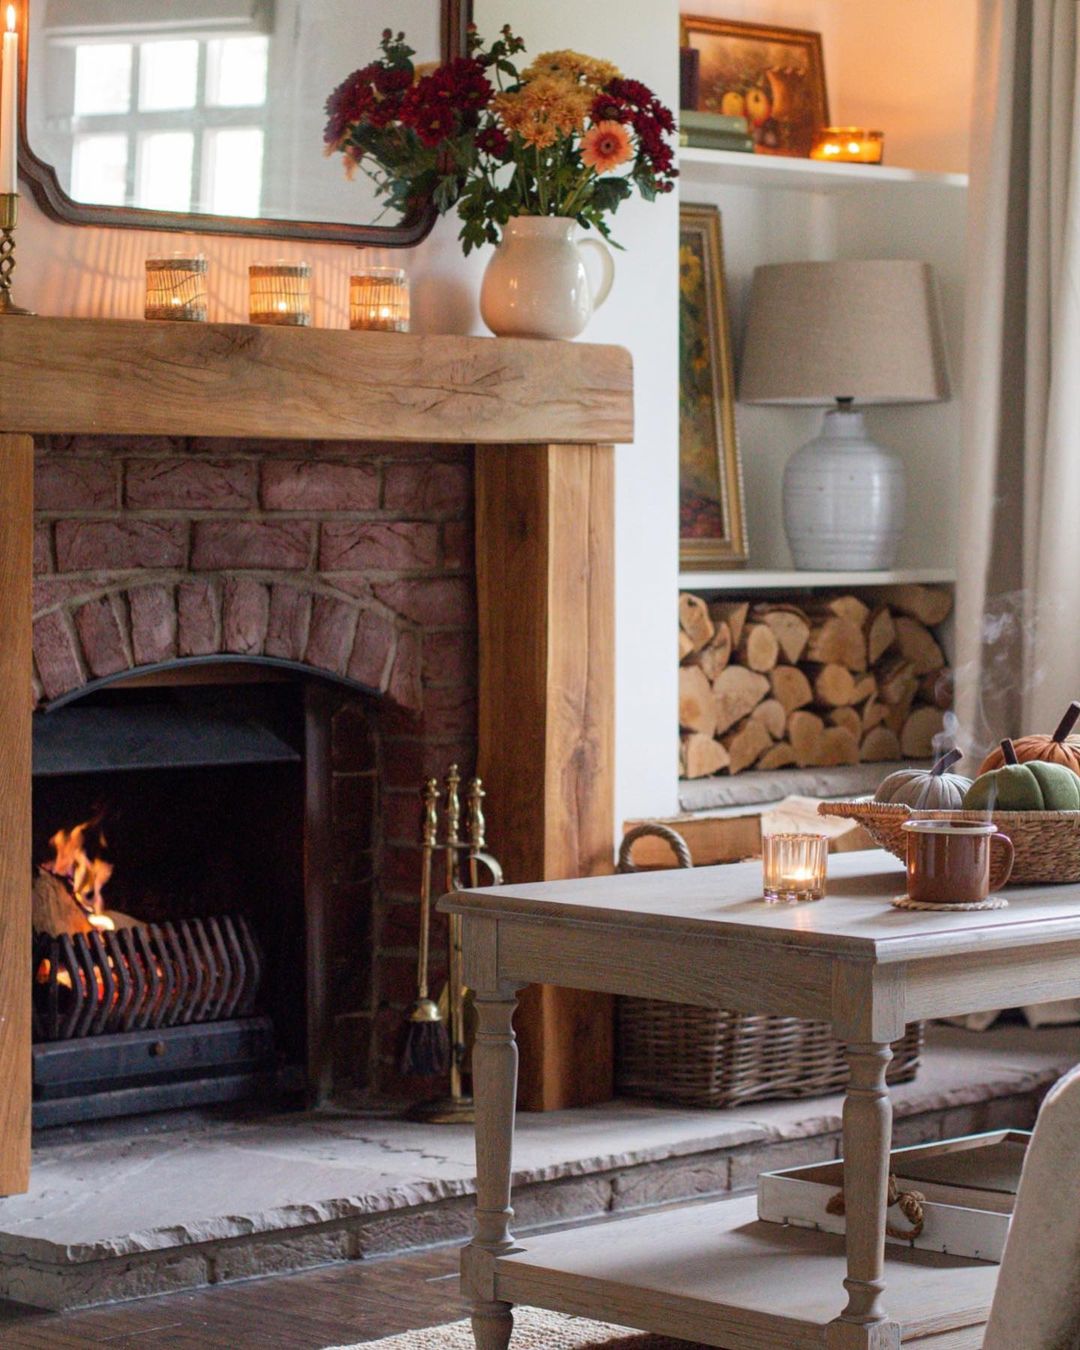 a red brick fireplace and wooden frame and furniture are what makes this living room interior exhibit a cottage feel